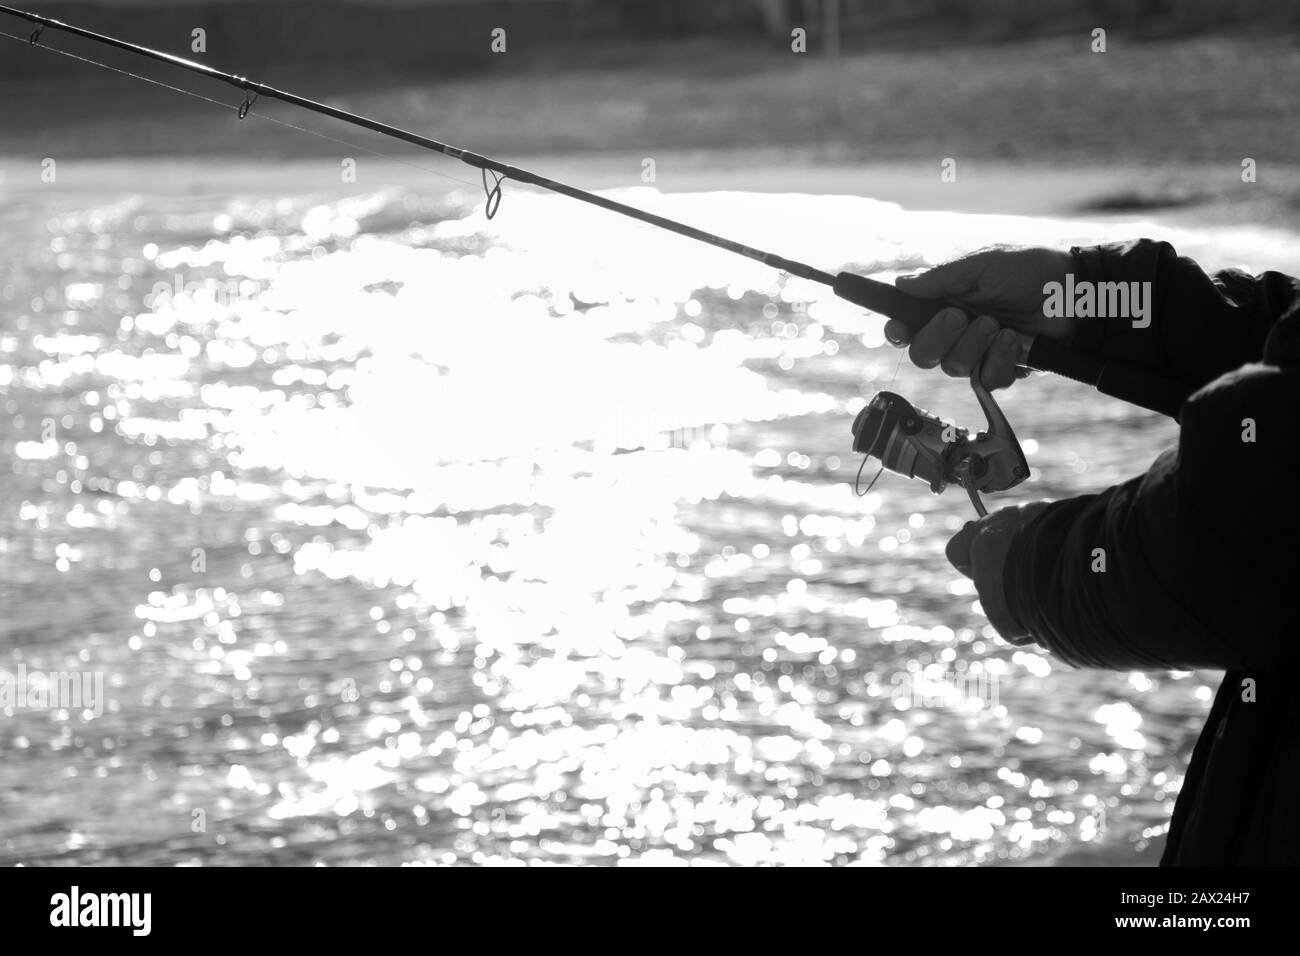 Fishing rod. Spinning reel black and white image with copy space Stock Photo